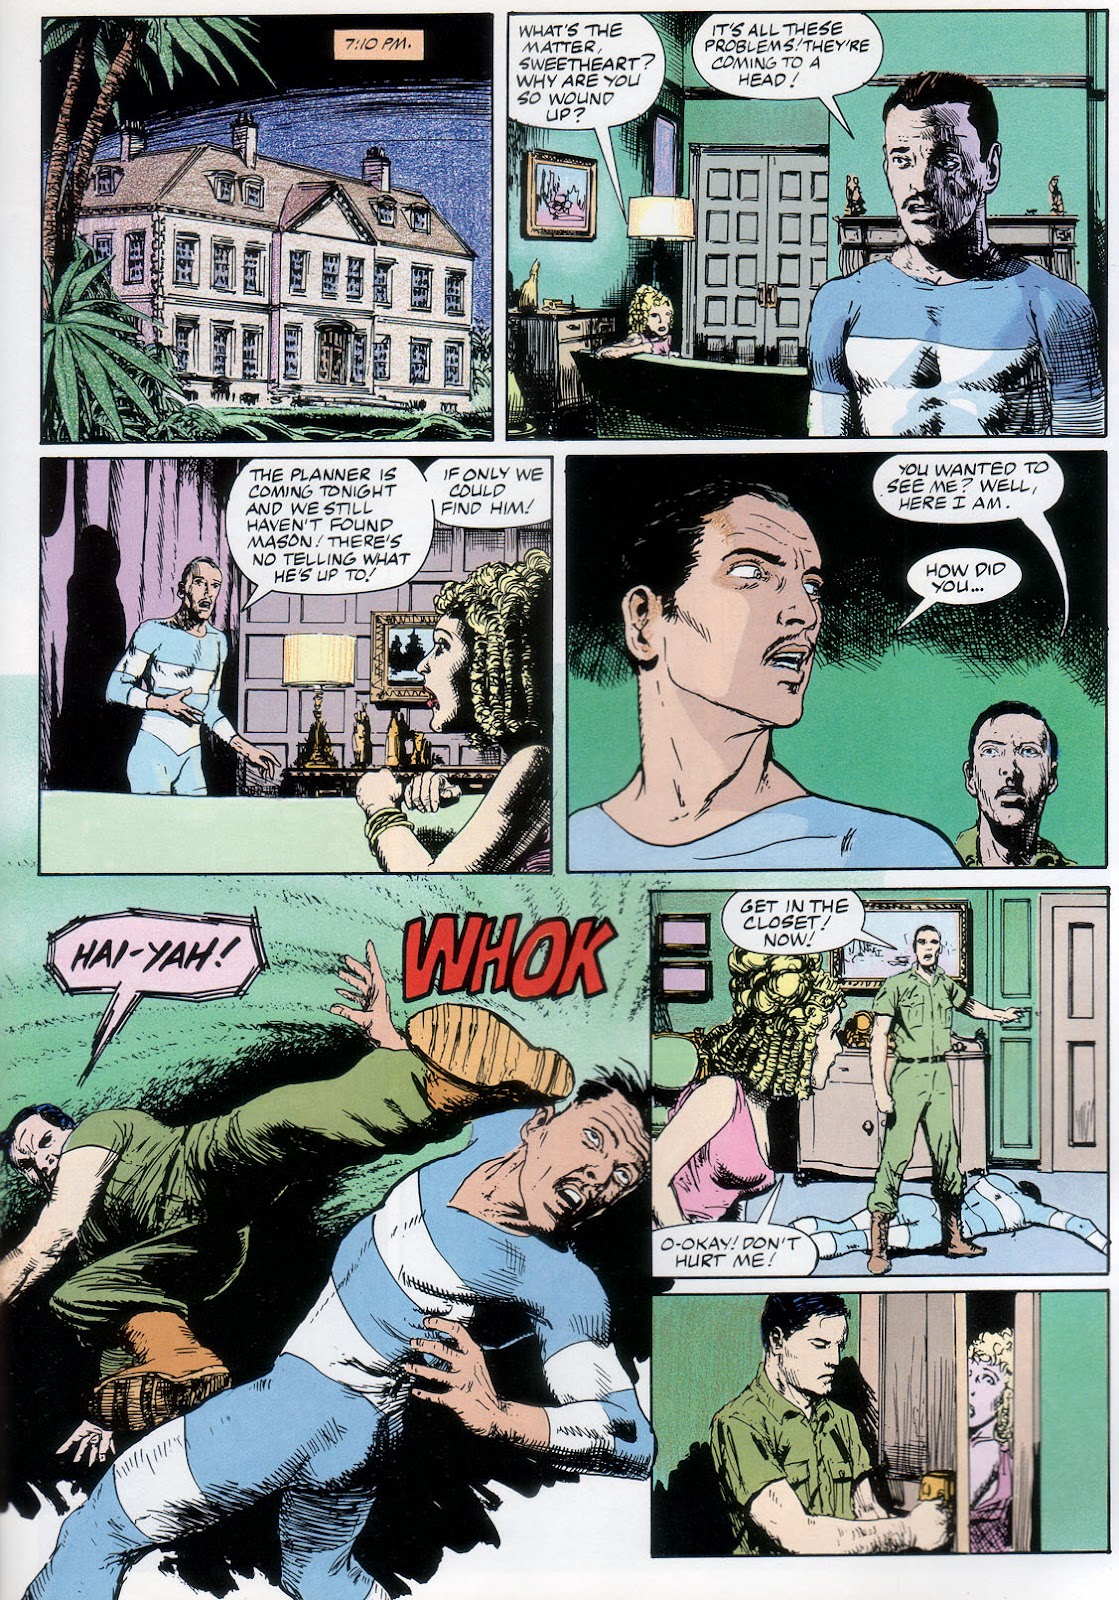 Marvel Graphic Novel issue 57 - Rick Mason - The Agent - Page 69